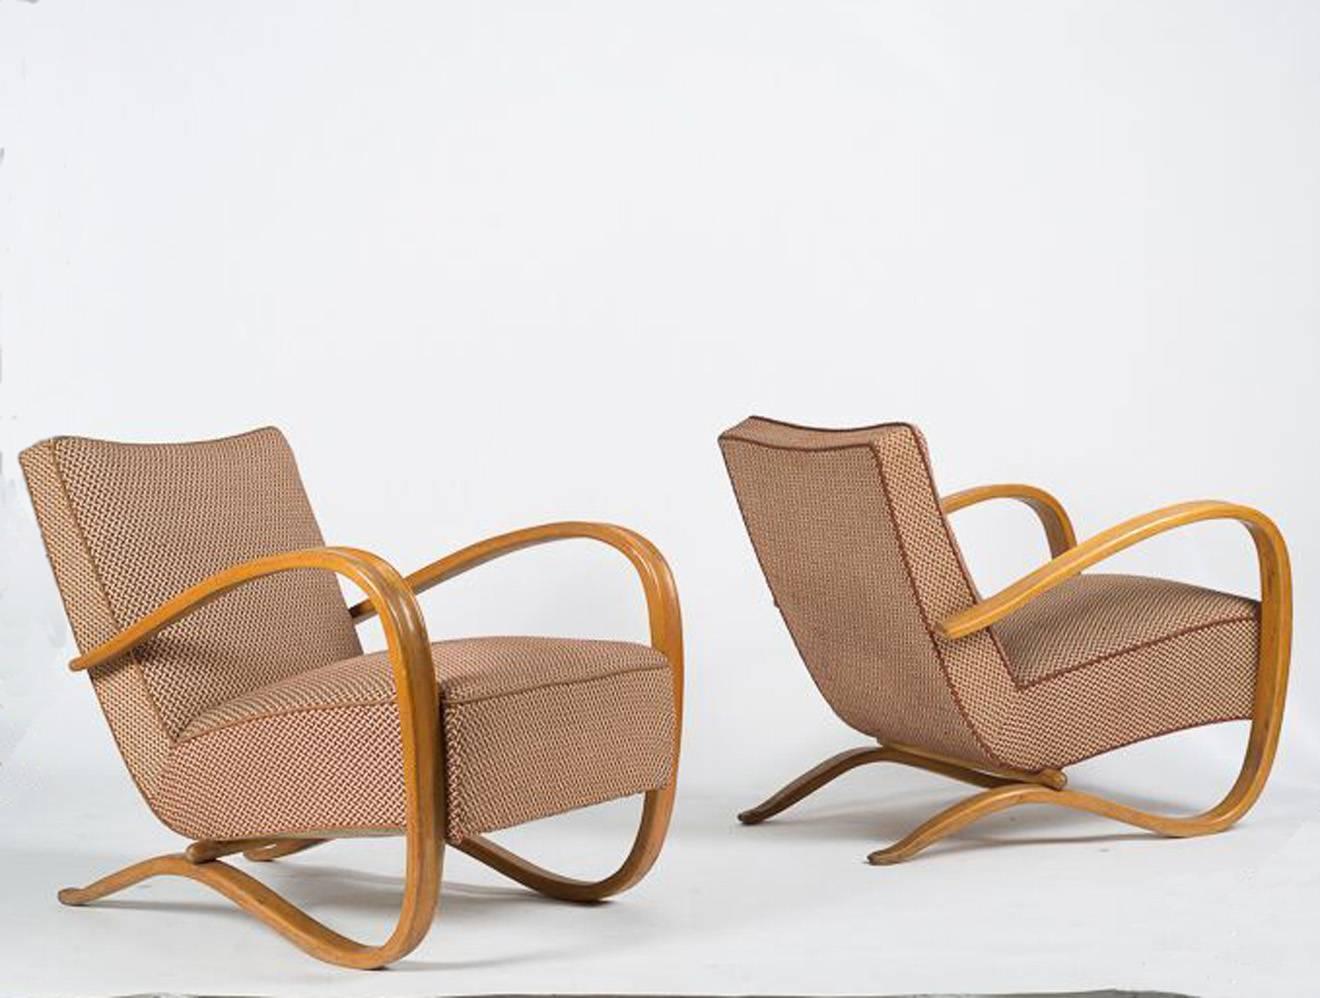 Single lounge chair from the 1930s designed by Jindrich Halabala for UP Zavody, Brno. Beech cantilevered bentwood frame. Excellent original condition including the upholstery.